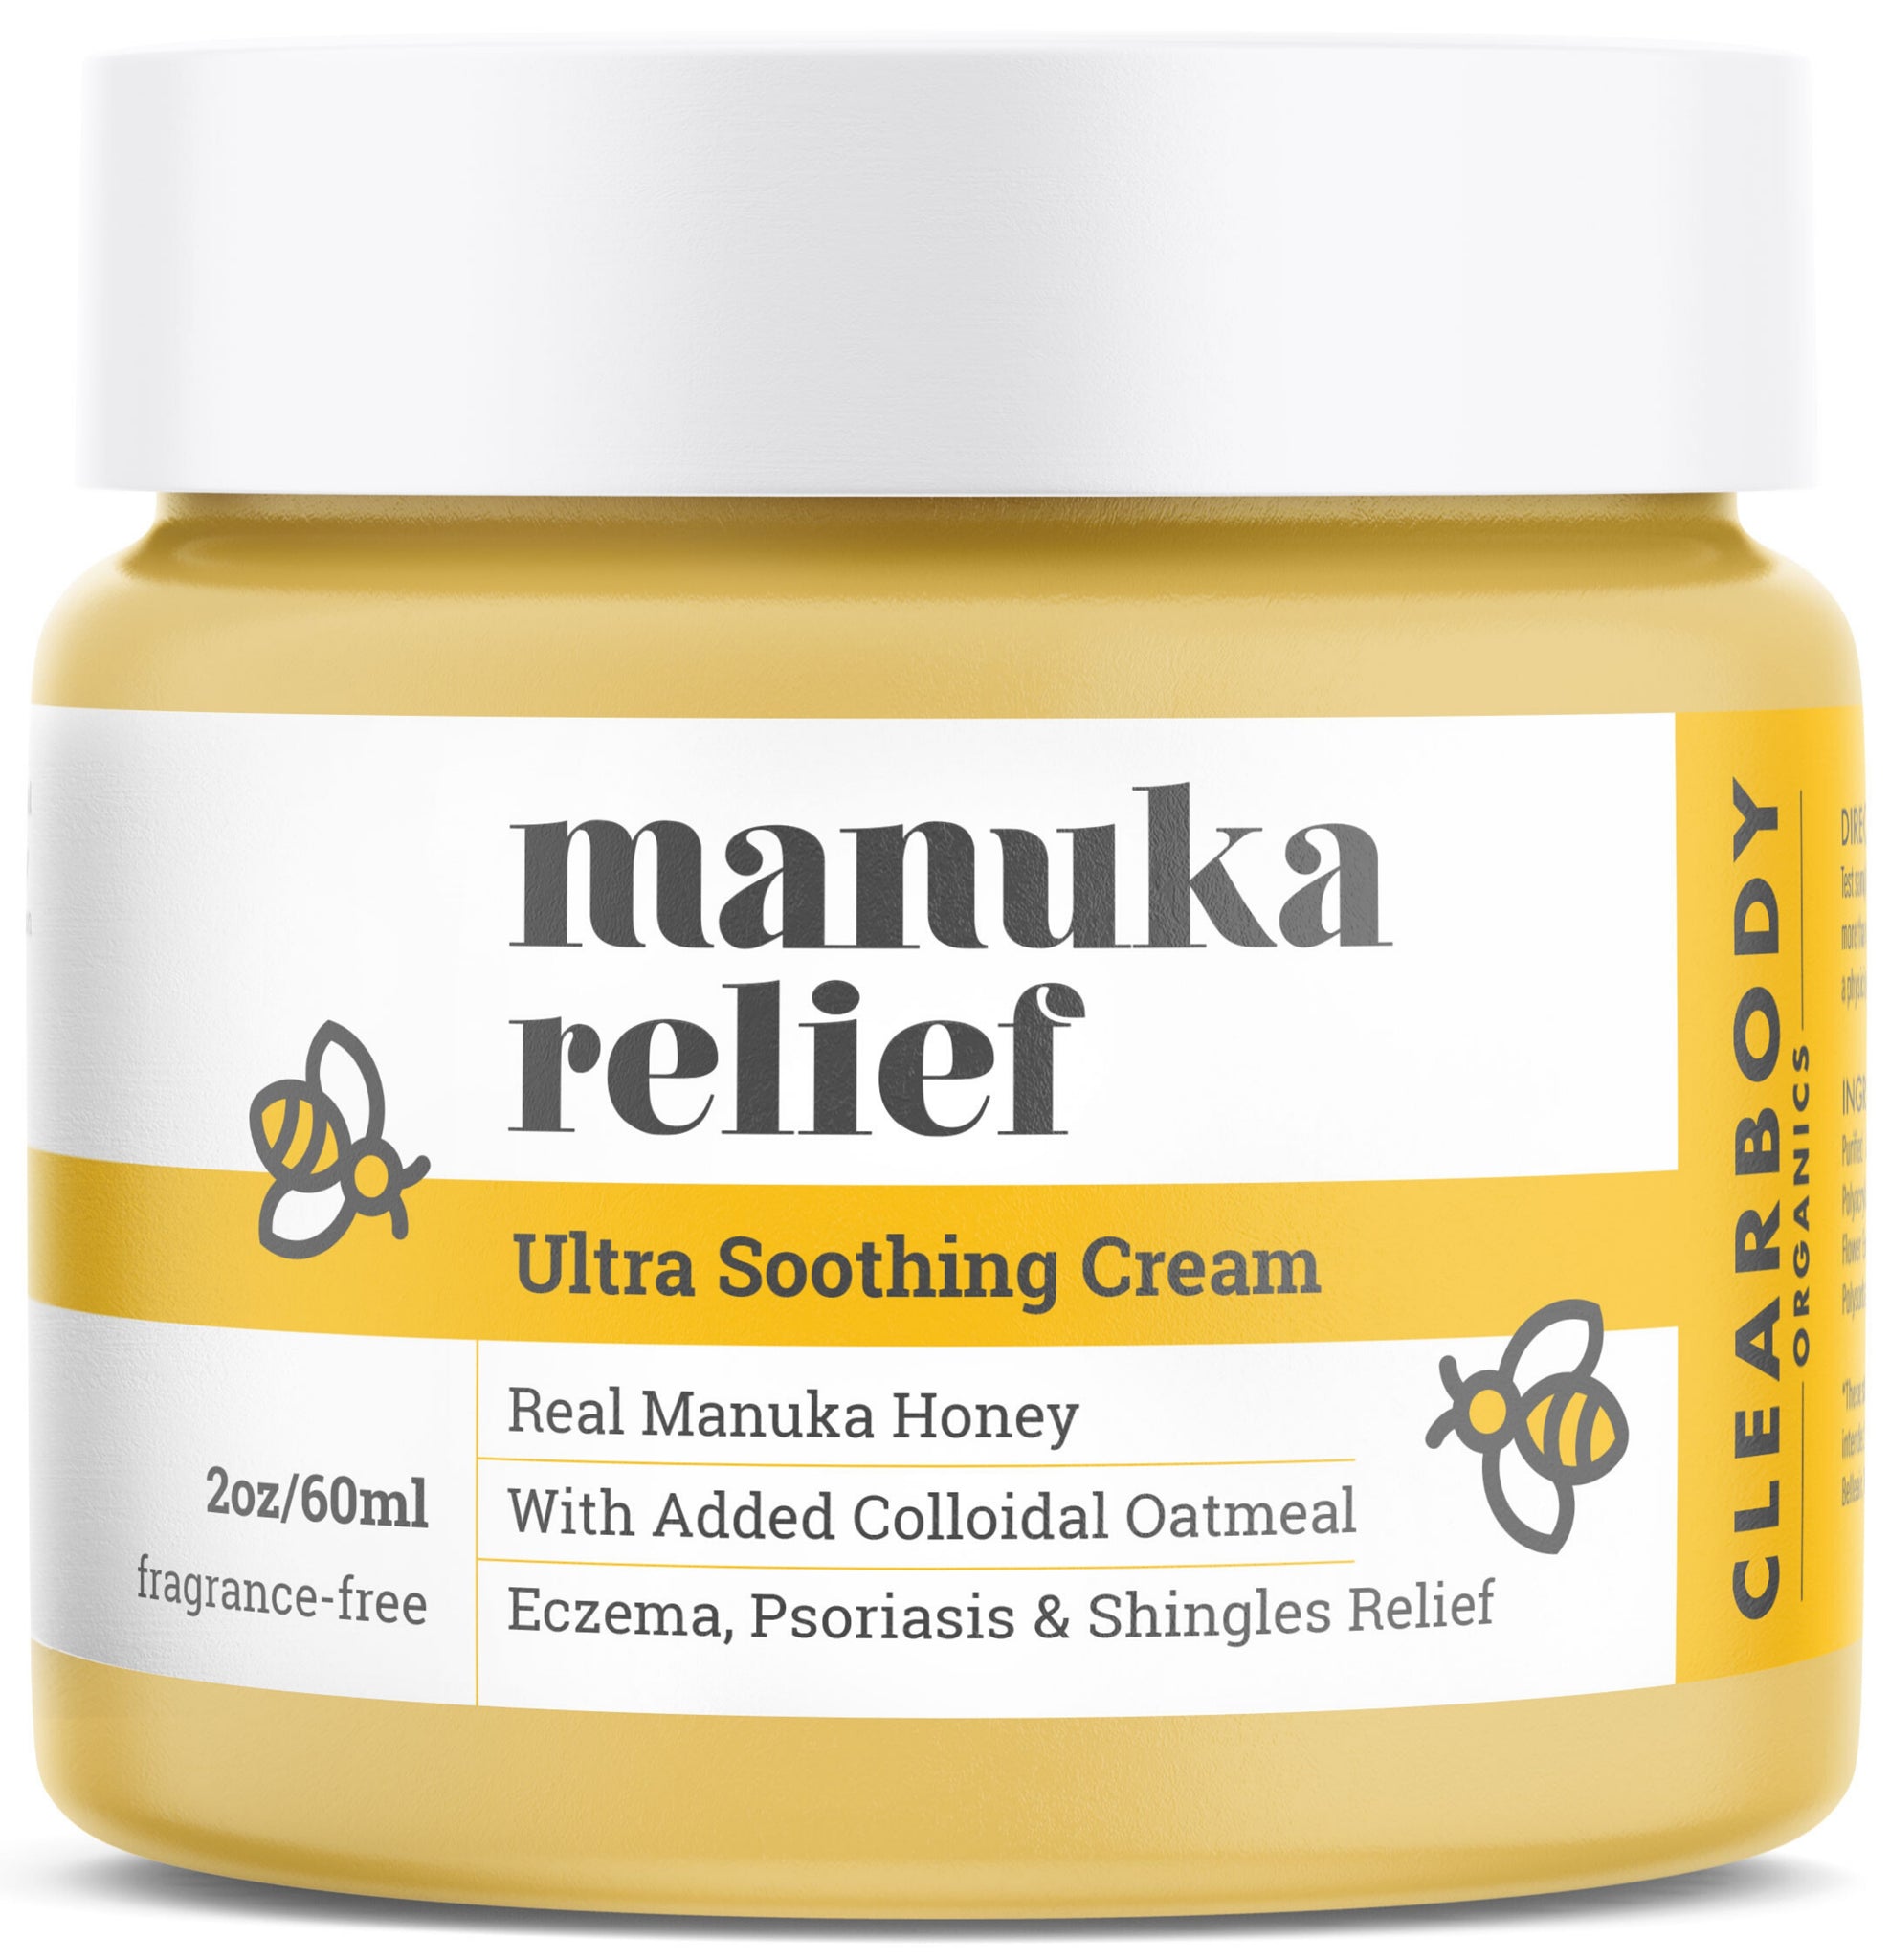 Manuka Relief Ultra Soothing Cream